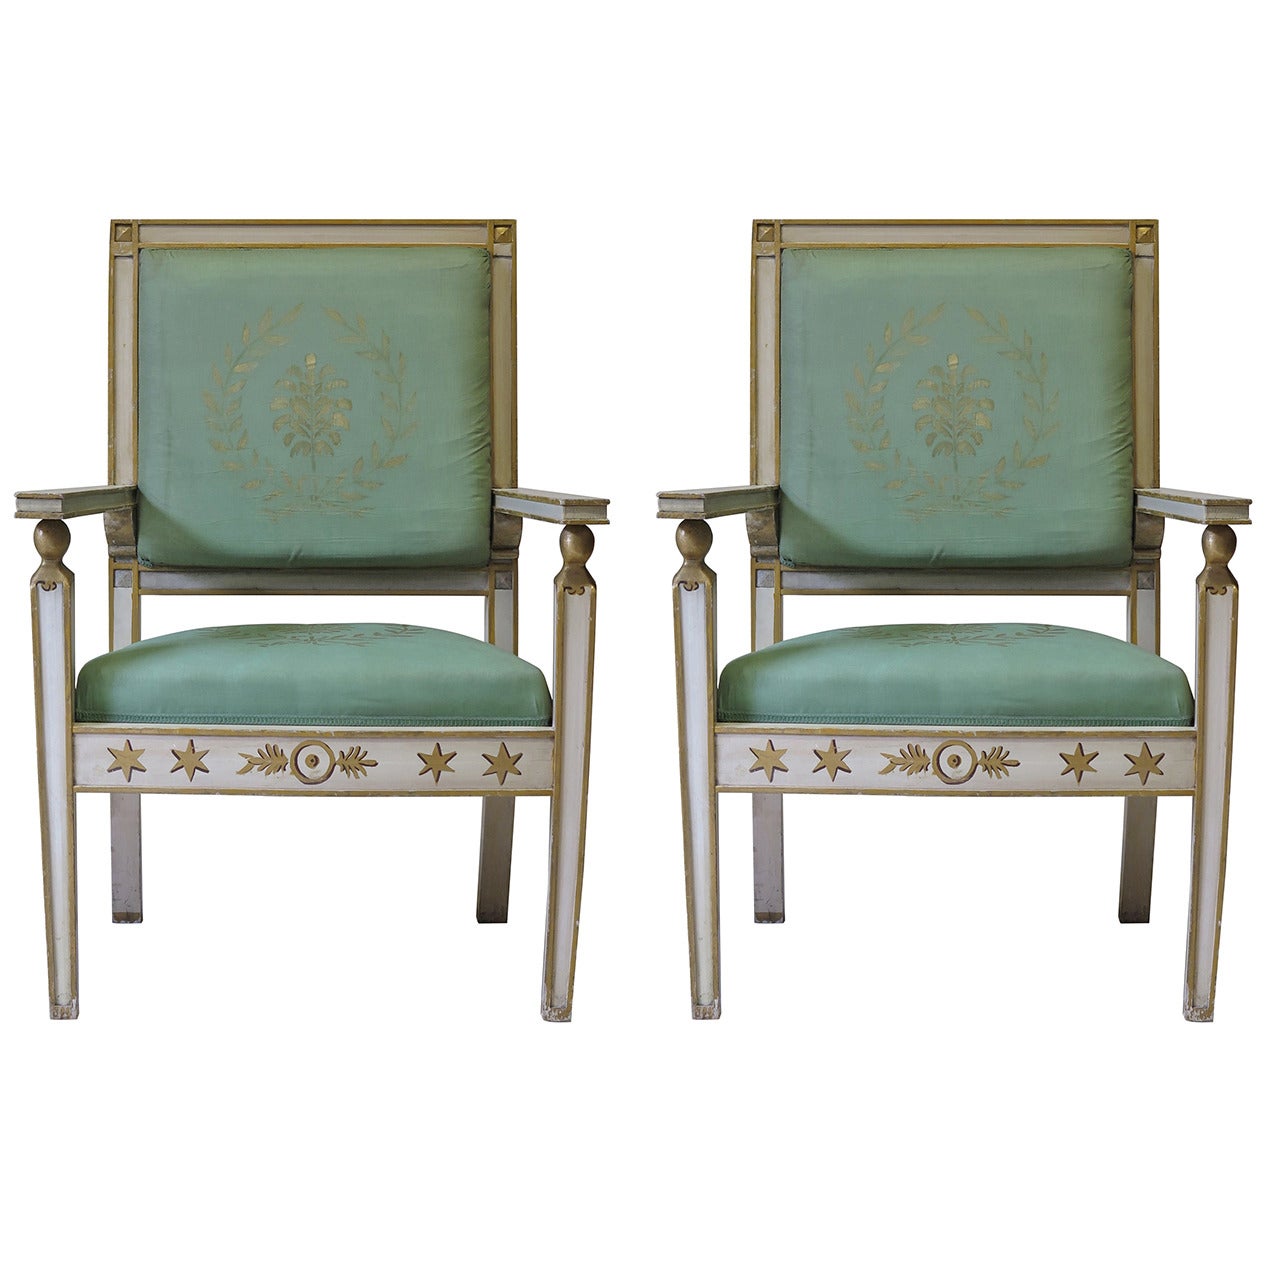 Pair of Empire Style Armchairs Made for the Theatre, France circa 1930s-1940s For Sale